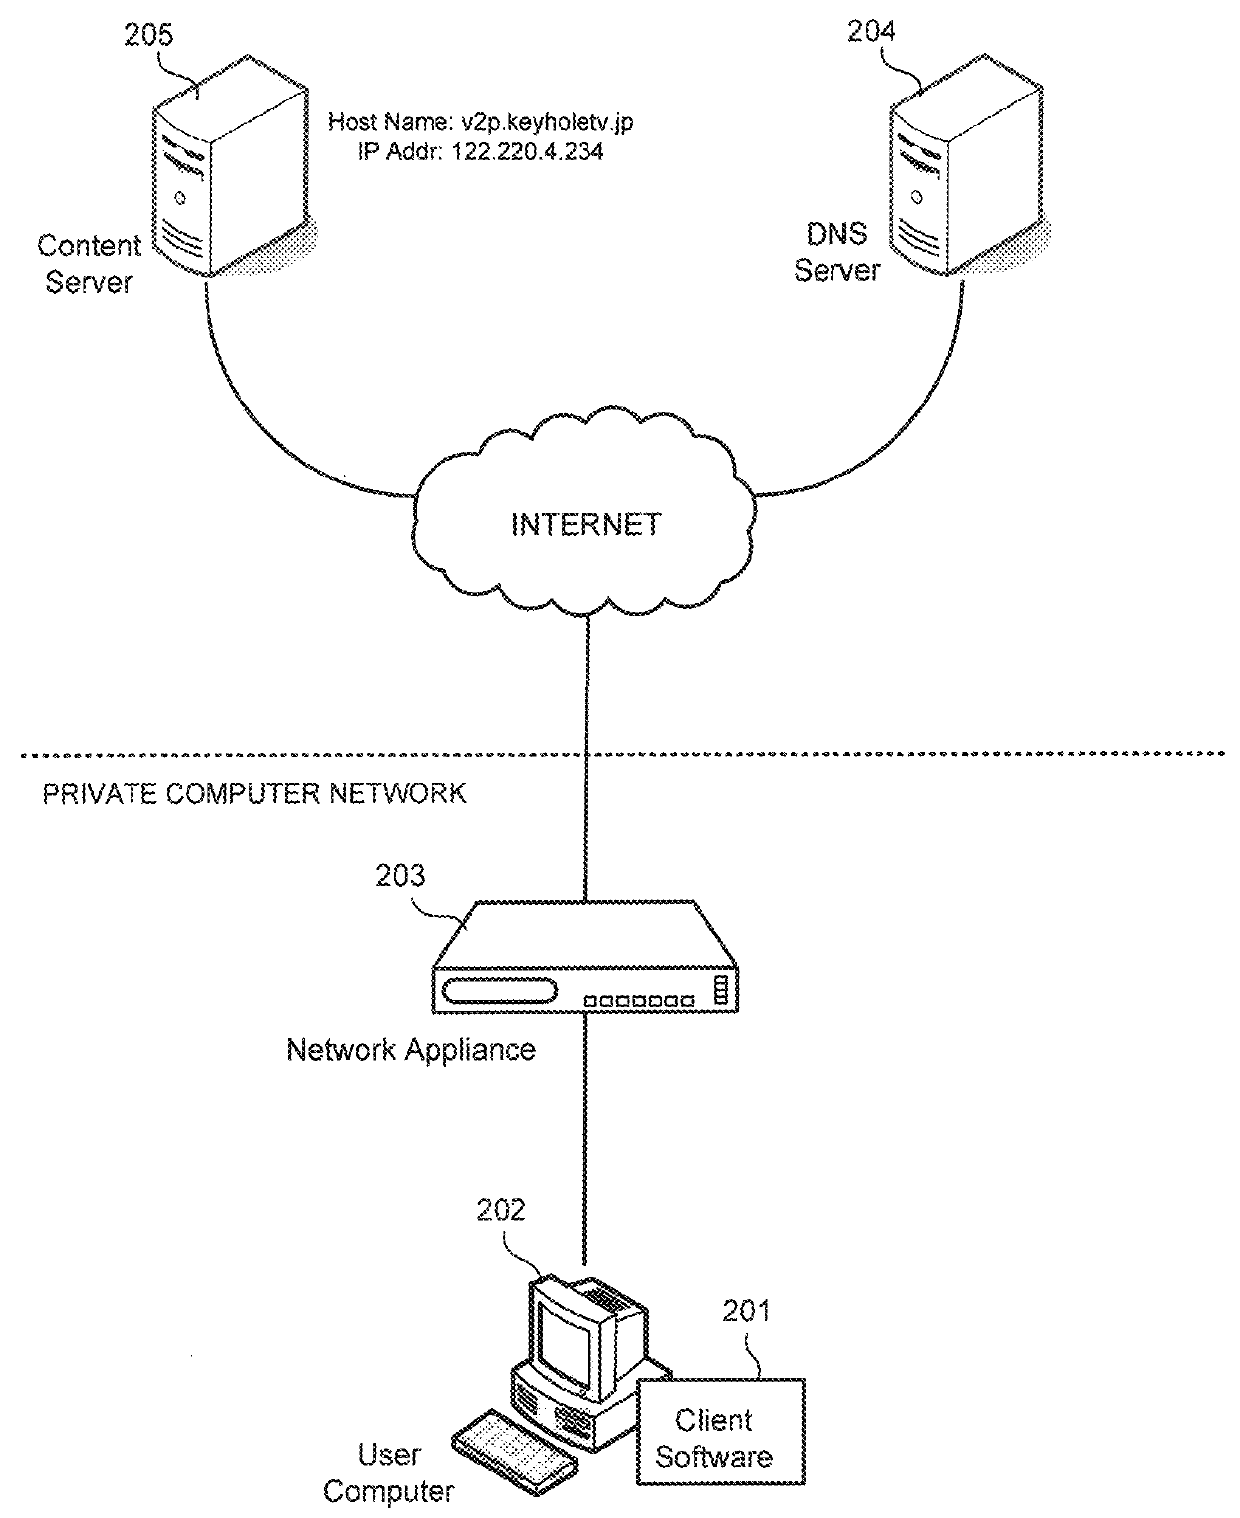 Network application classification for network traffic management